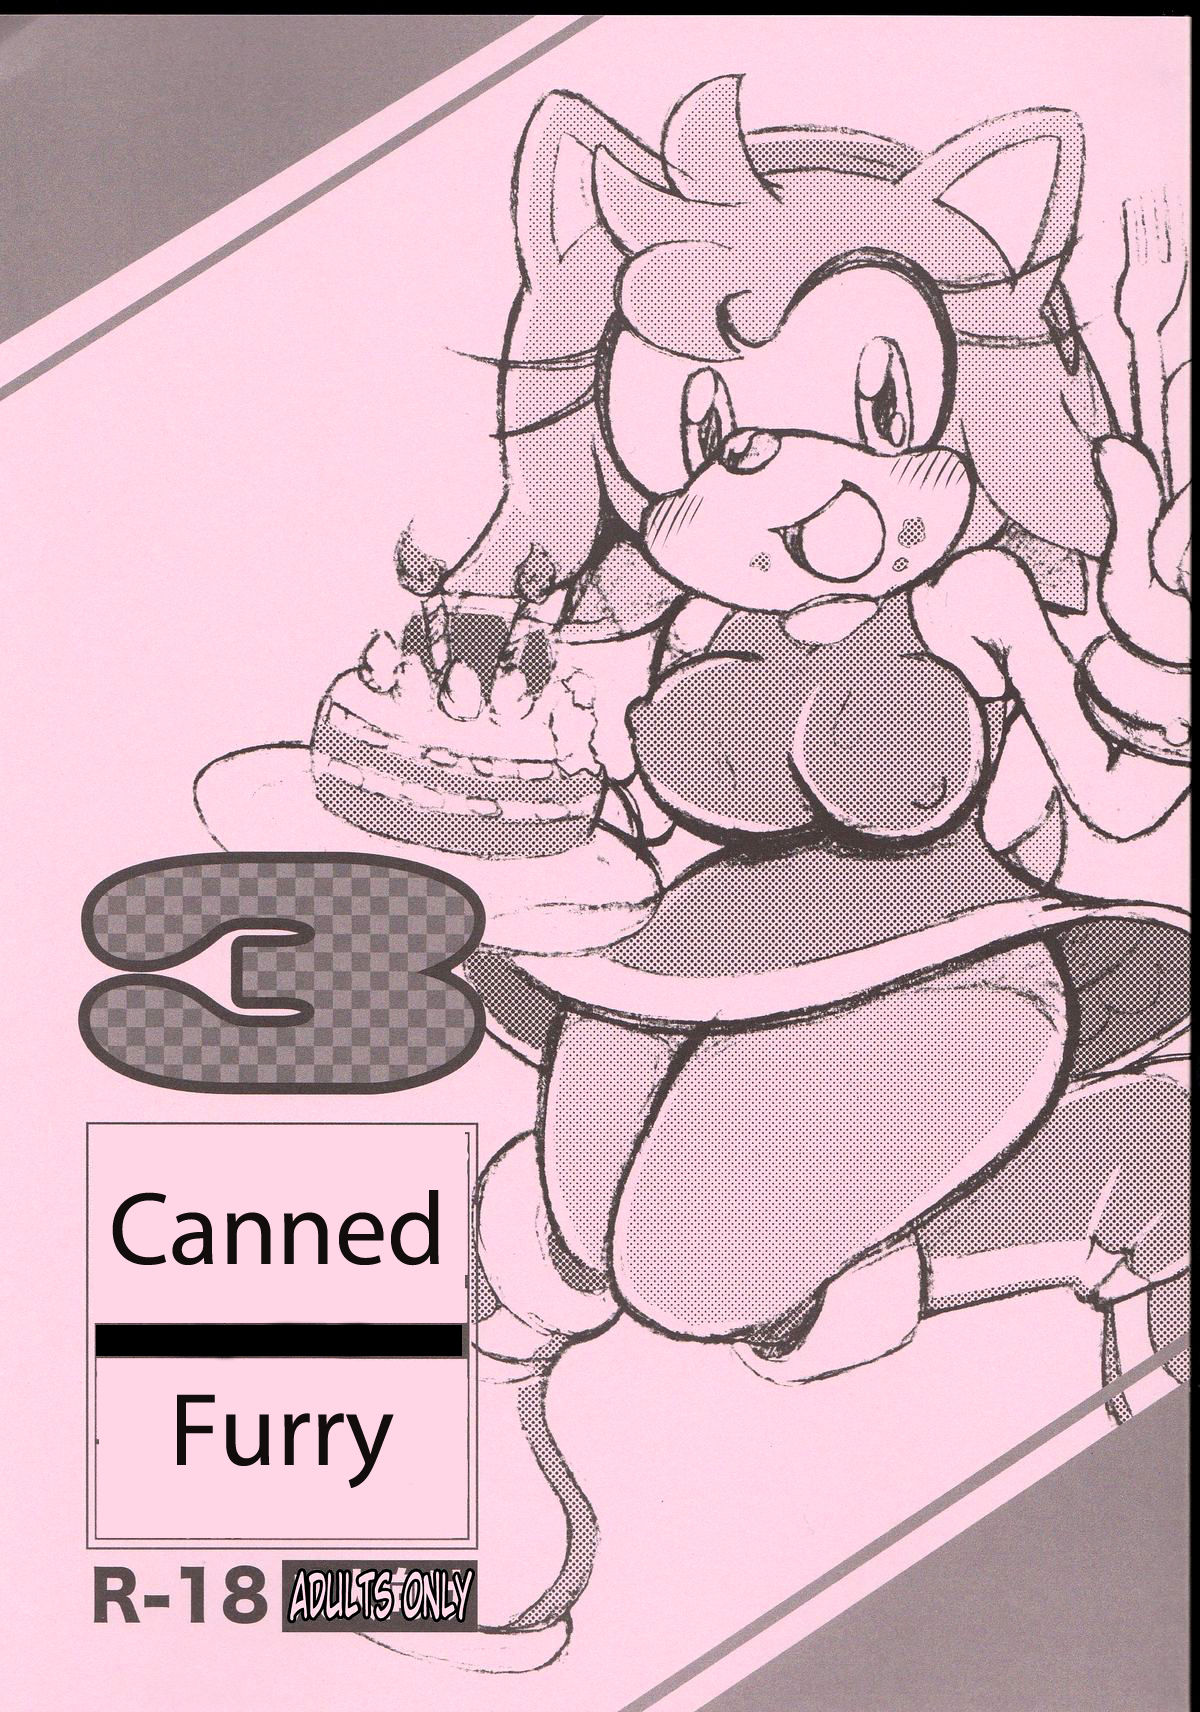 Canned Furry Porn - Kemono no Kanzume 3 | Canned Furry 3 - Page 1 - HentaiEra